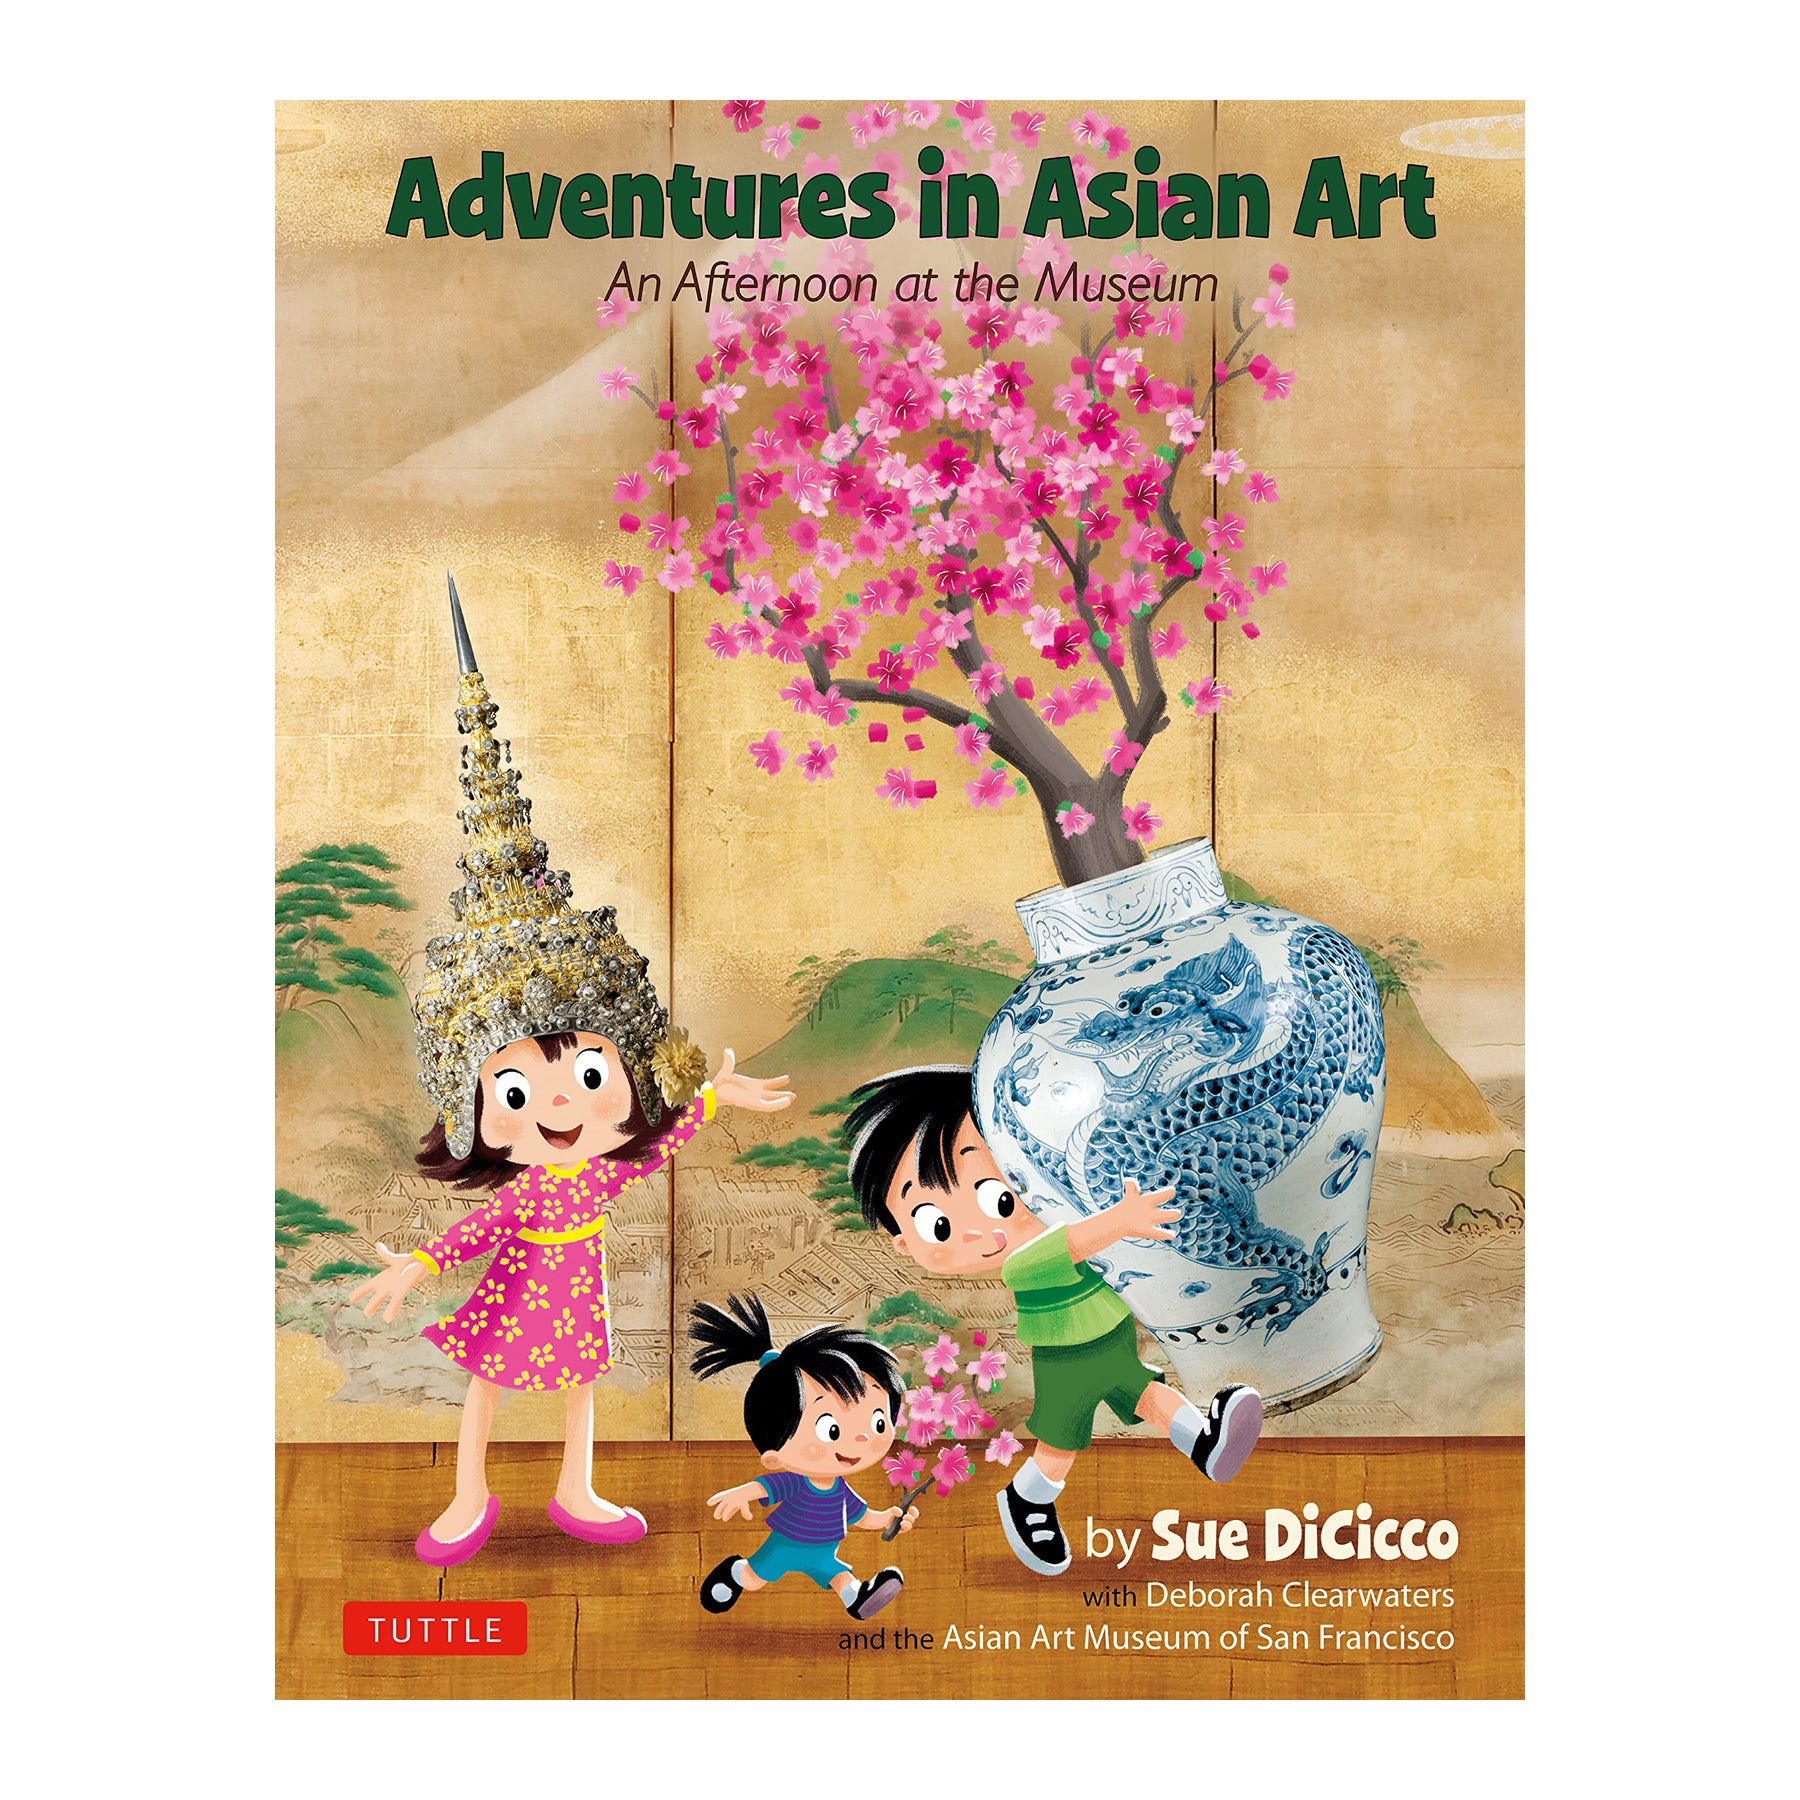 Adventures in Asian Art: An Afternoon at the Museum